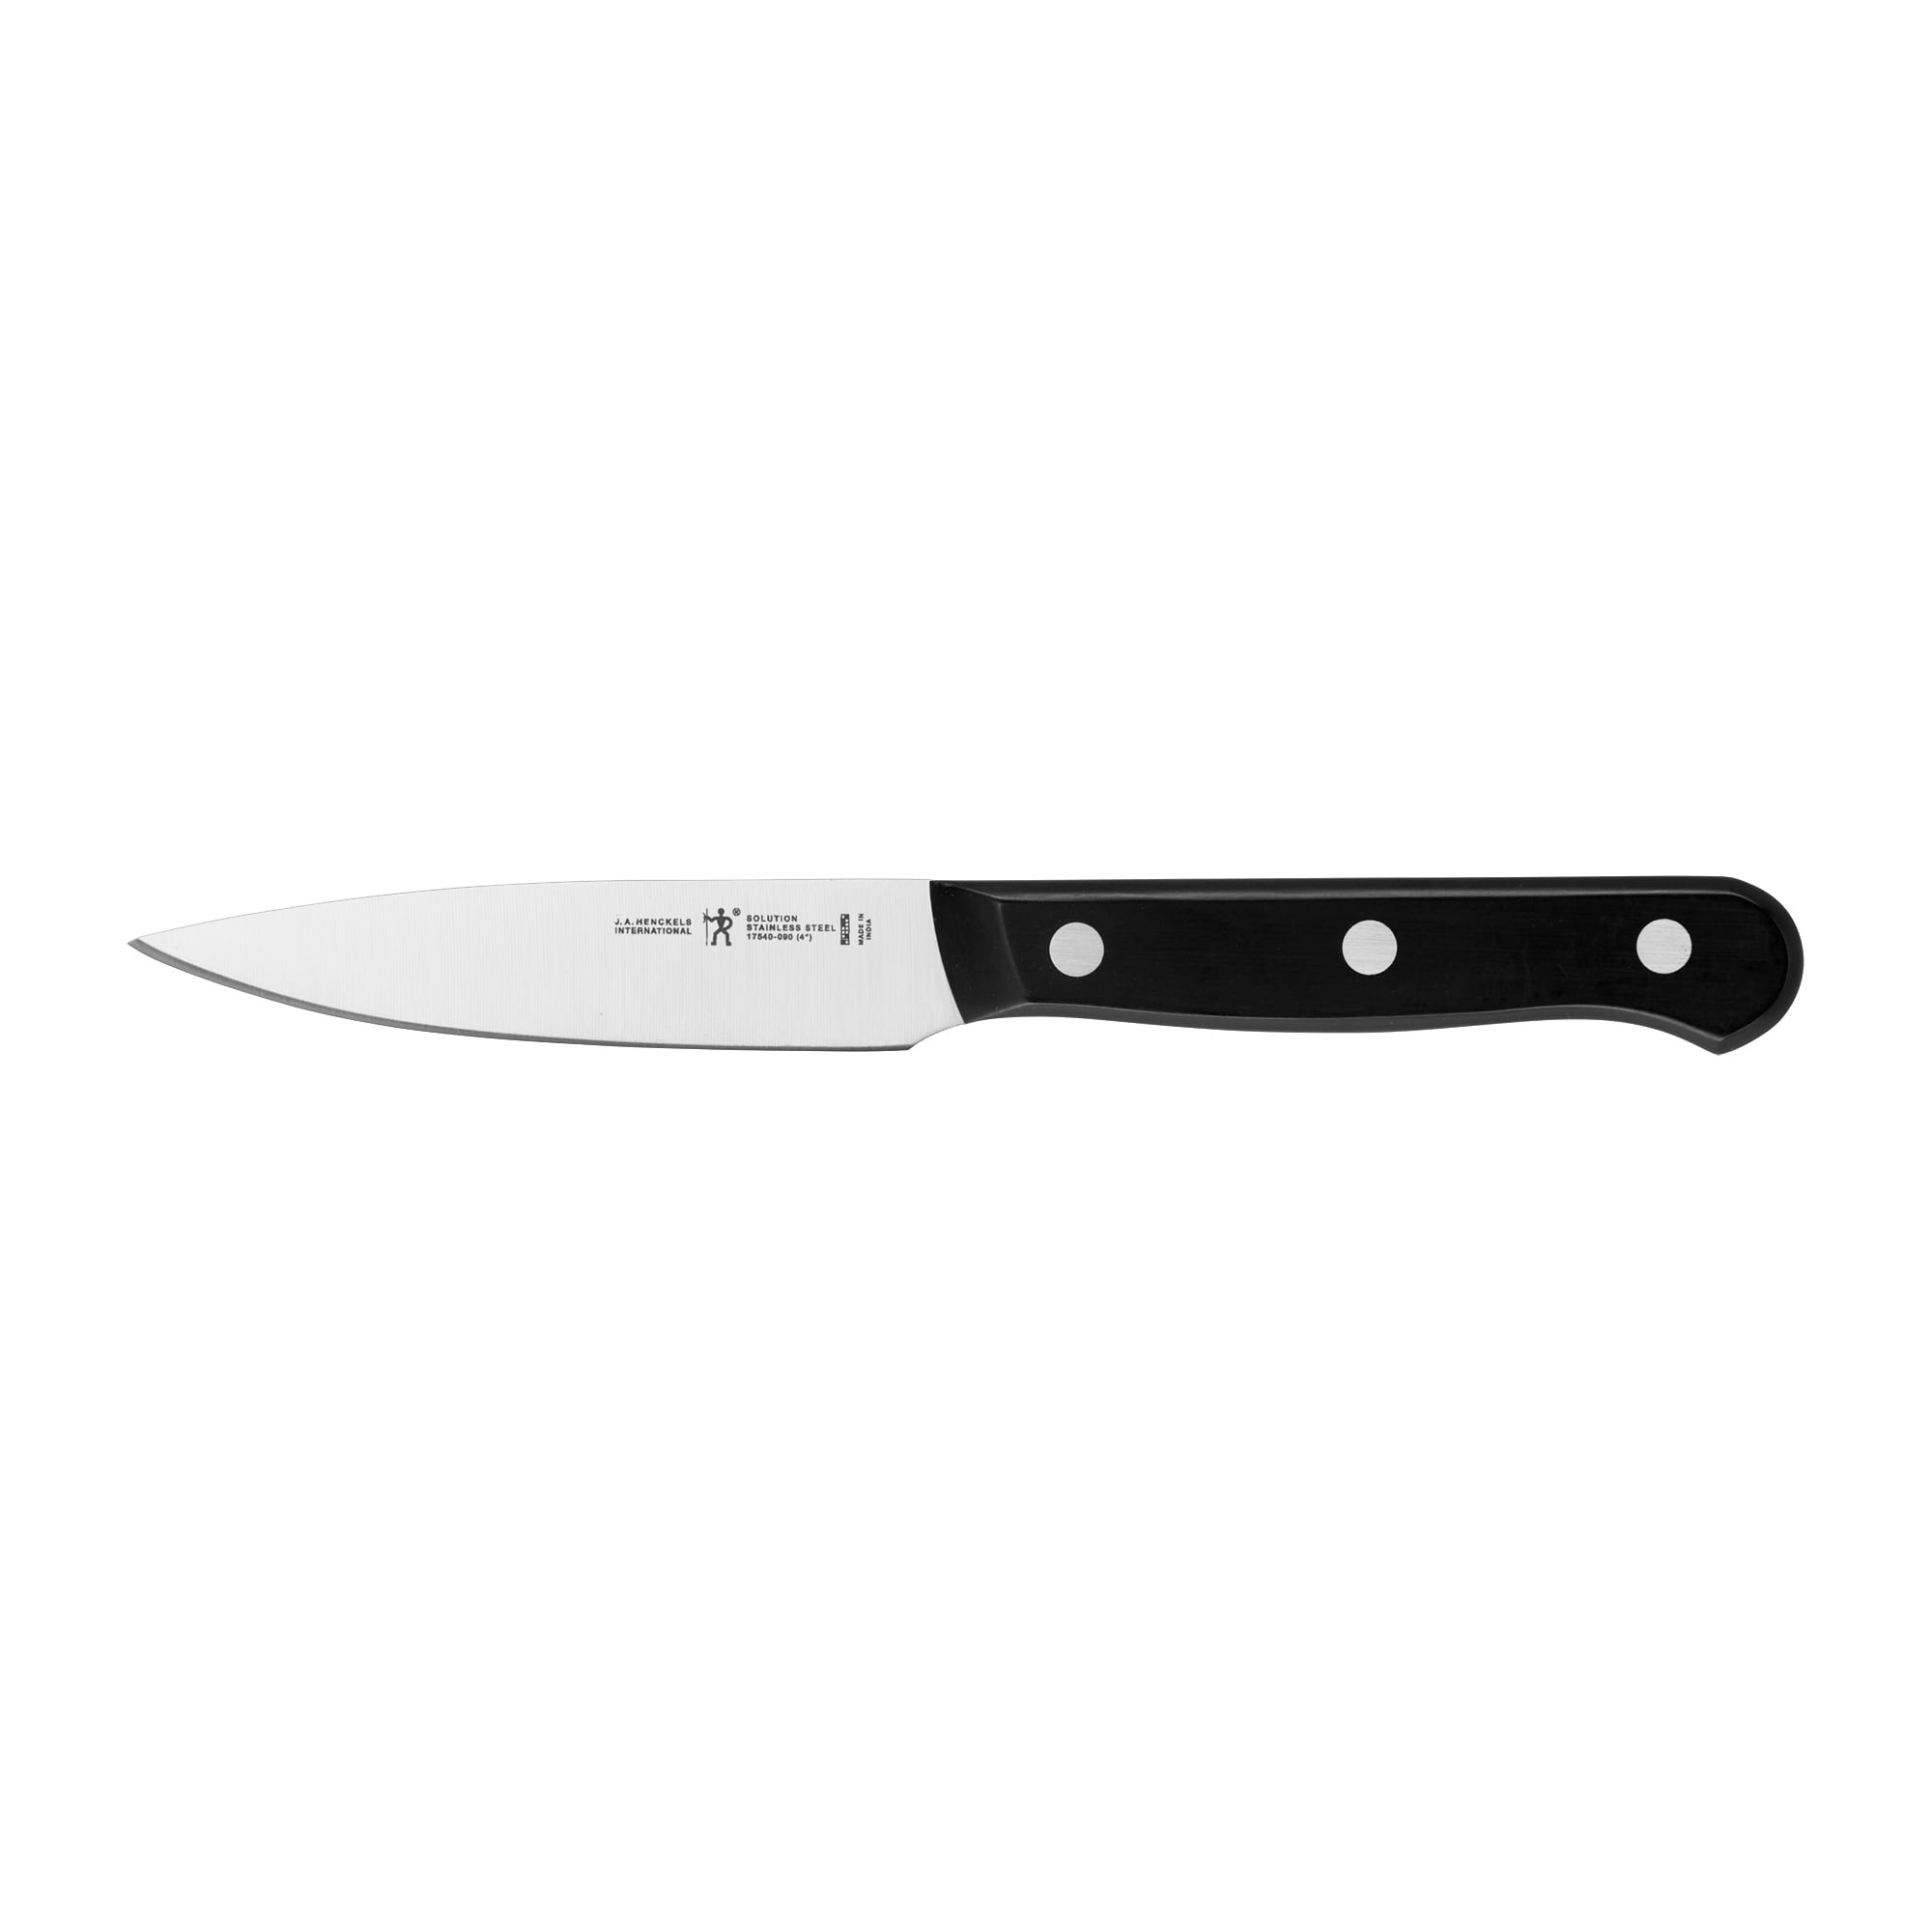 https://ak1.ostkcdn.com/images/products/is/images/direct/6f8872c555be23a4bbfd2646f92599f47a0880a5/Henckels-International-Solution-4-inch-Paring-Knife.jpg